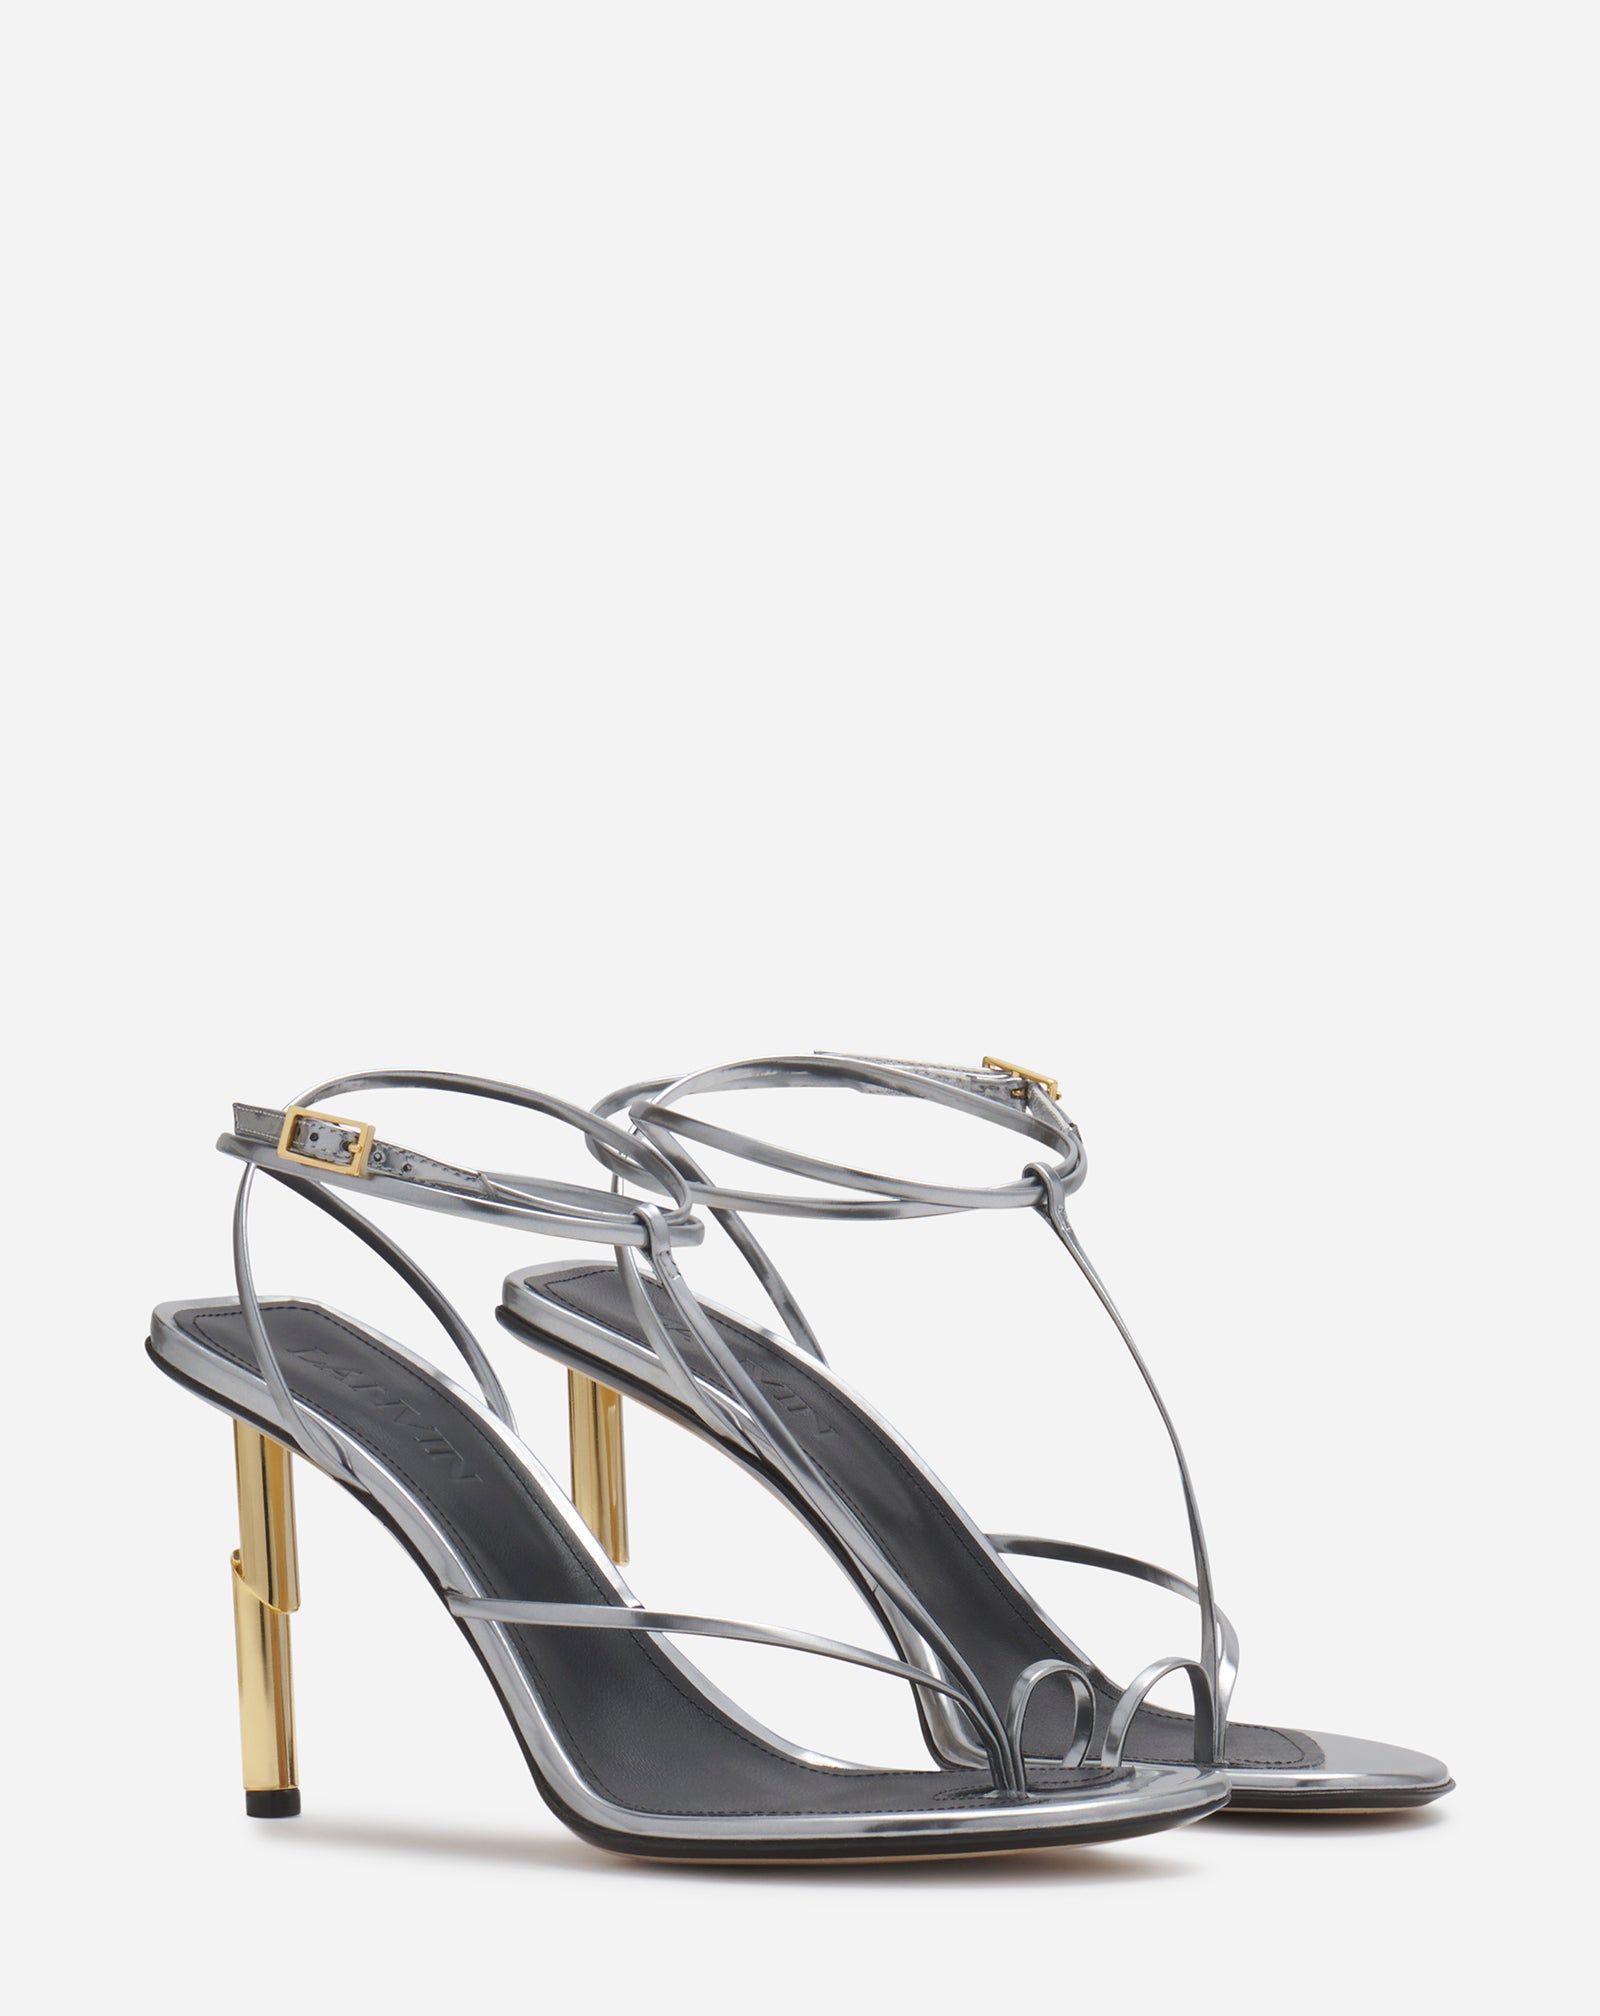 SEQUENCE BY LANVIN SANDALS IN METALLIC LEATHER, SILVER